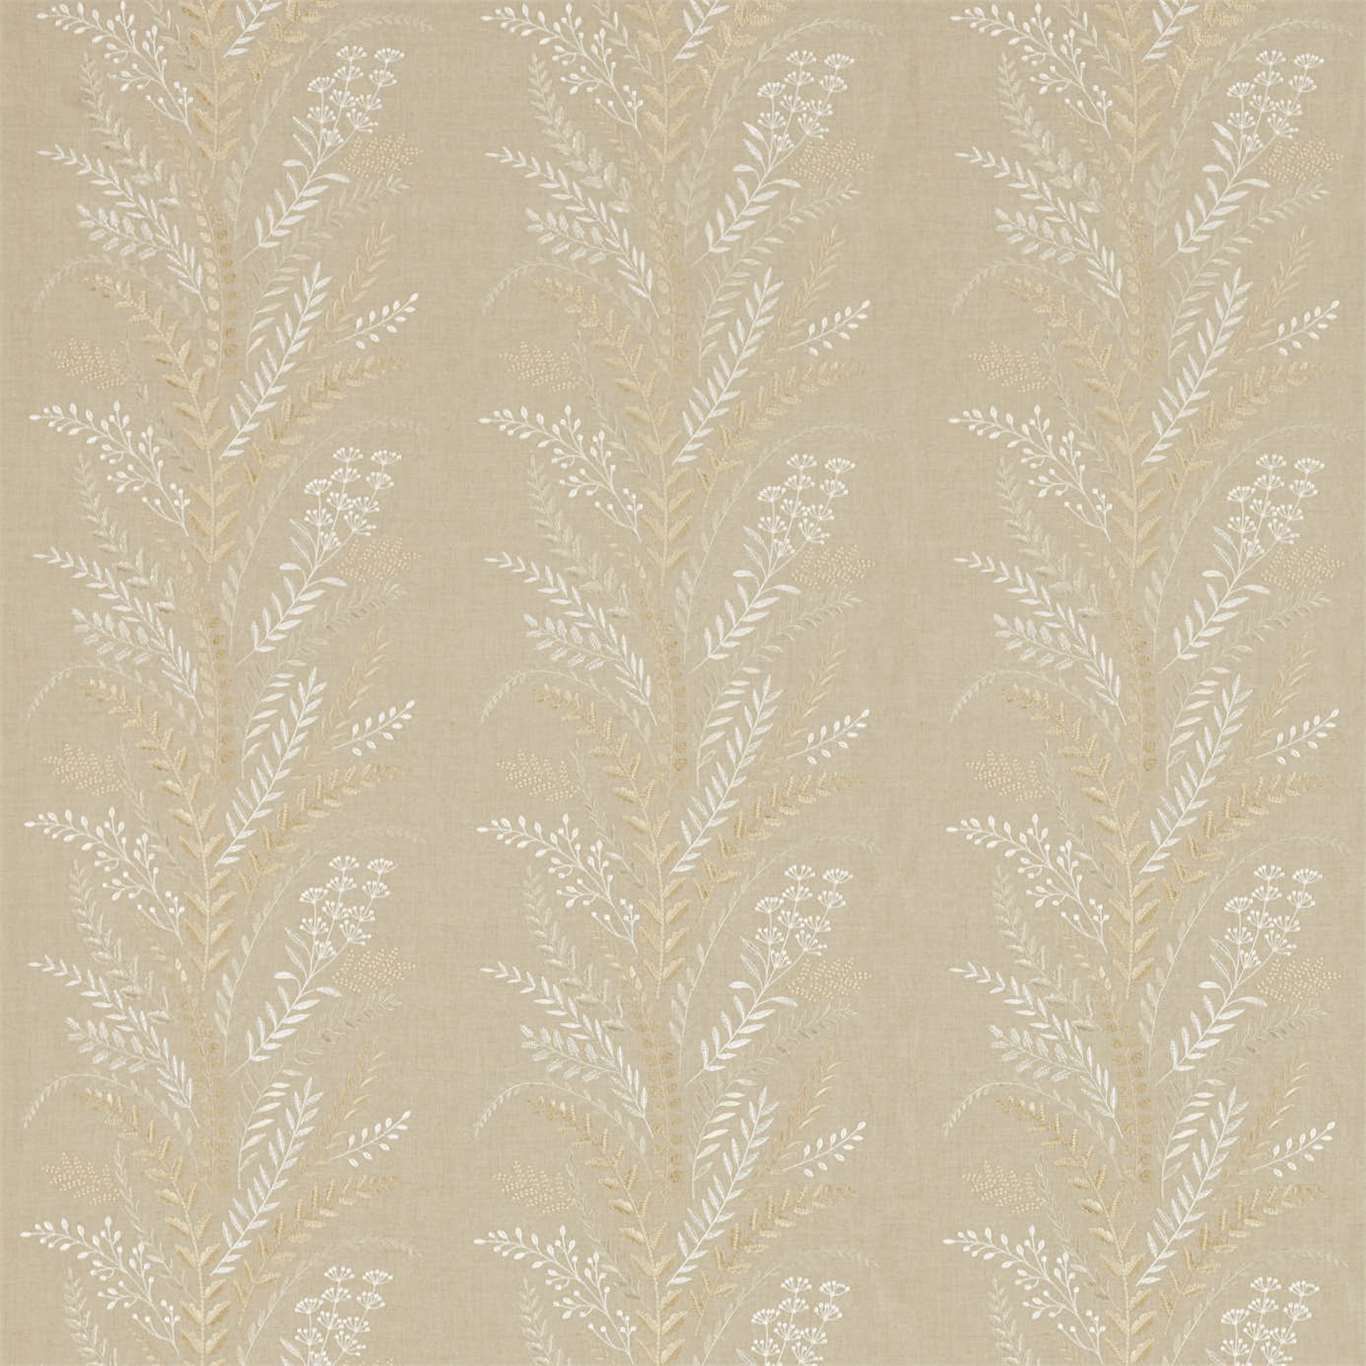 Belsay Linen Fabric by SAN